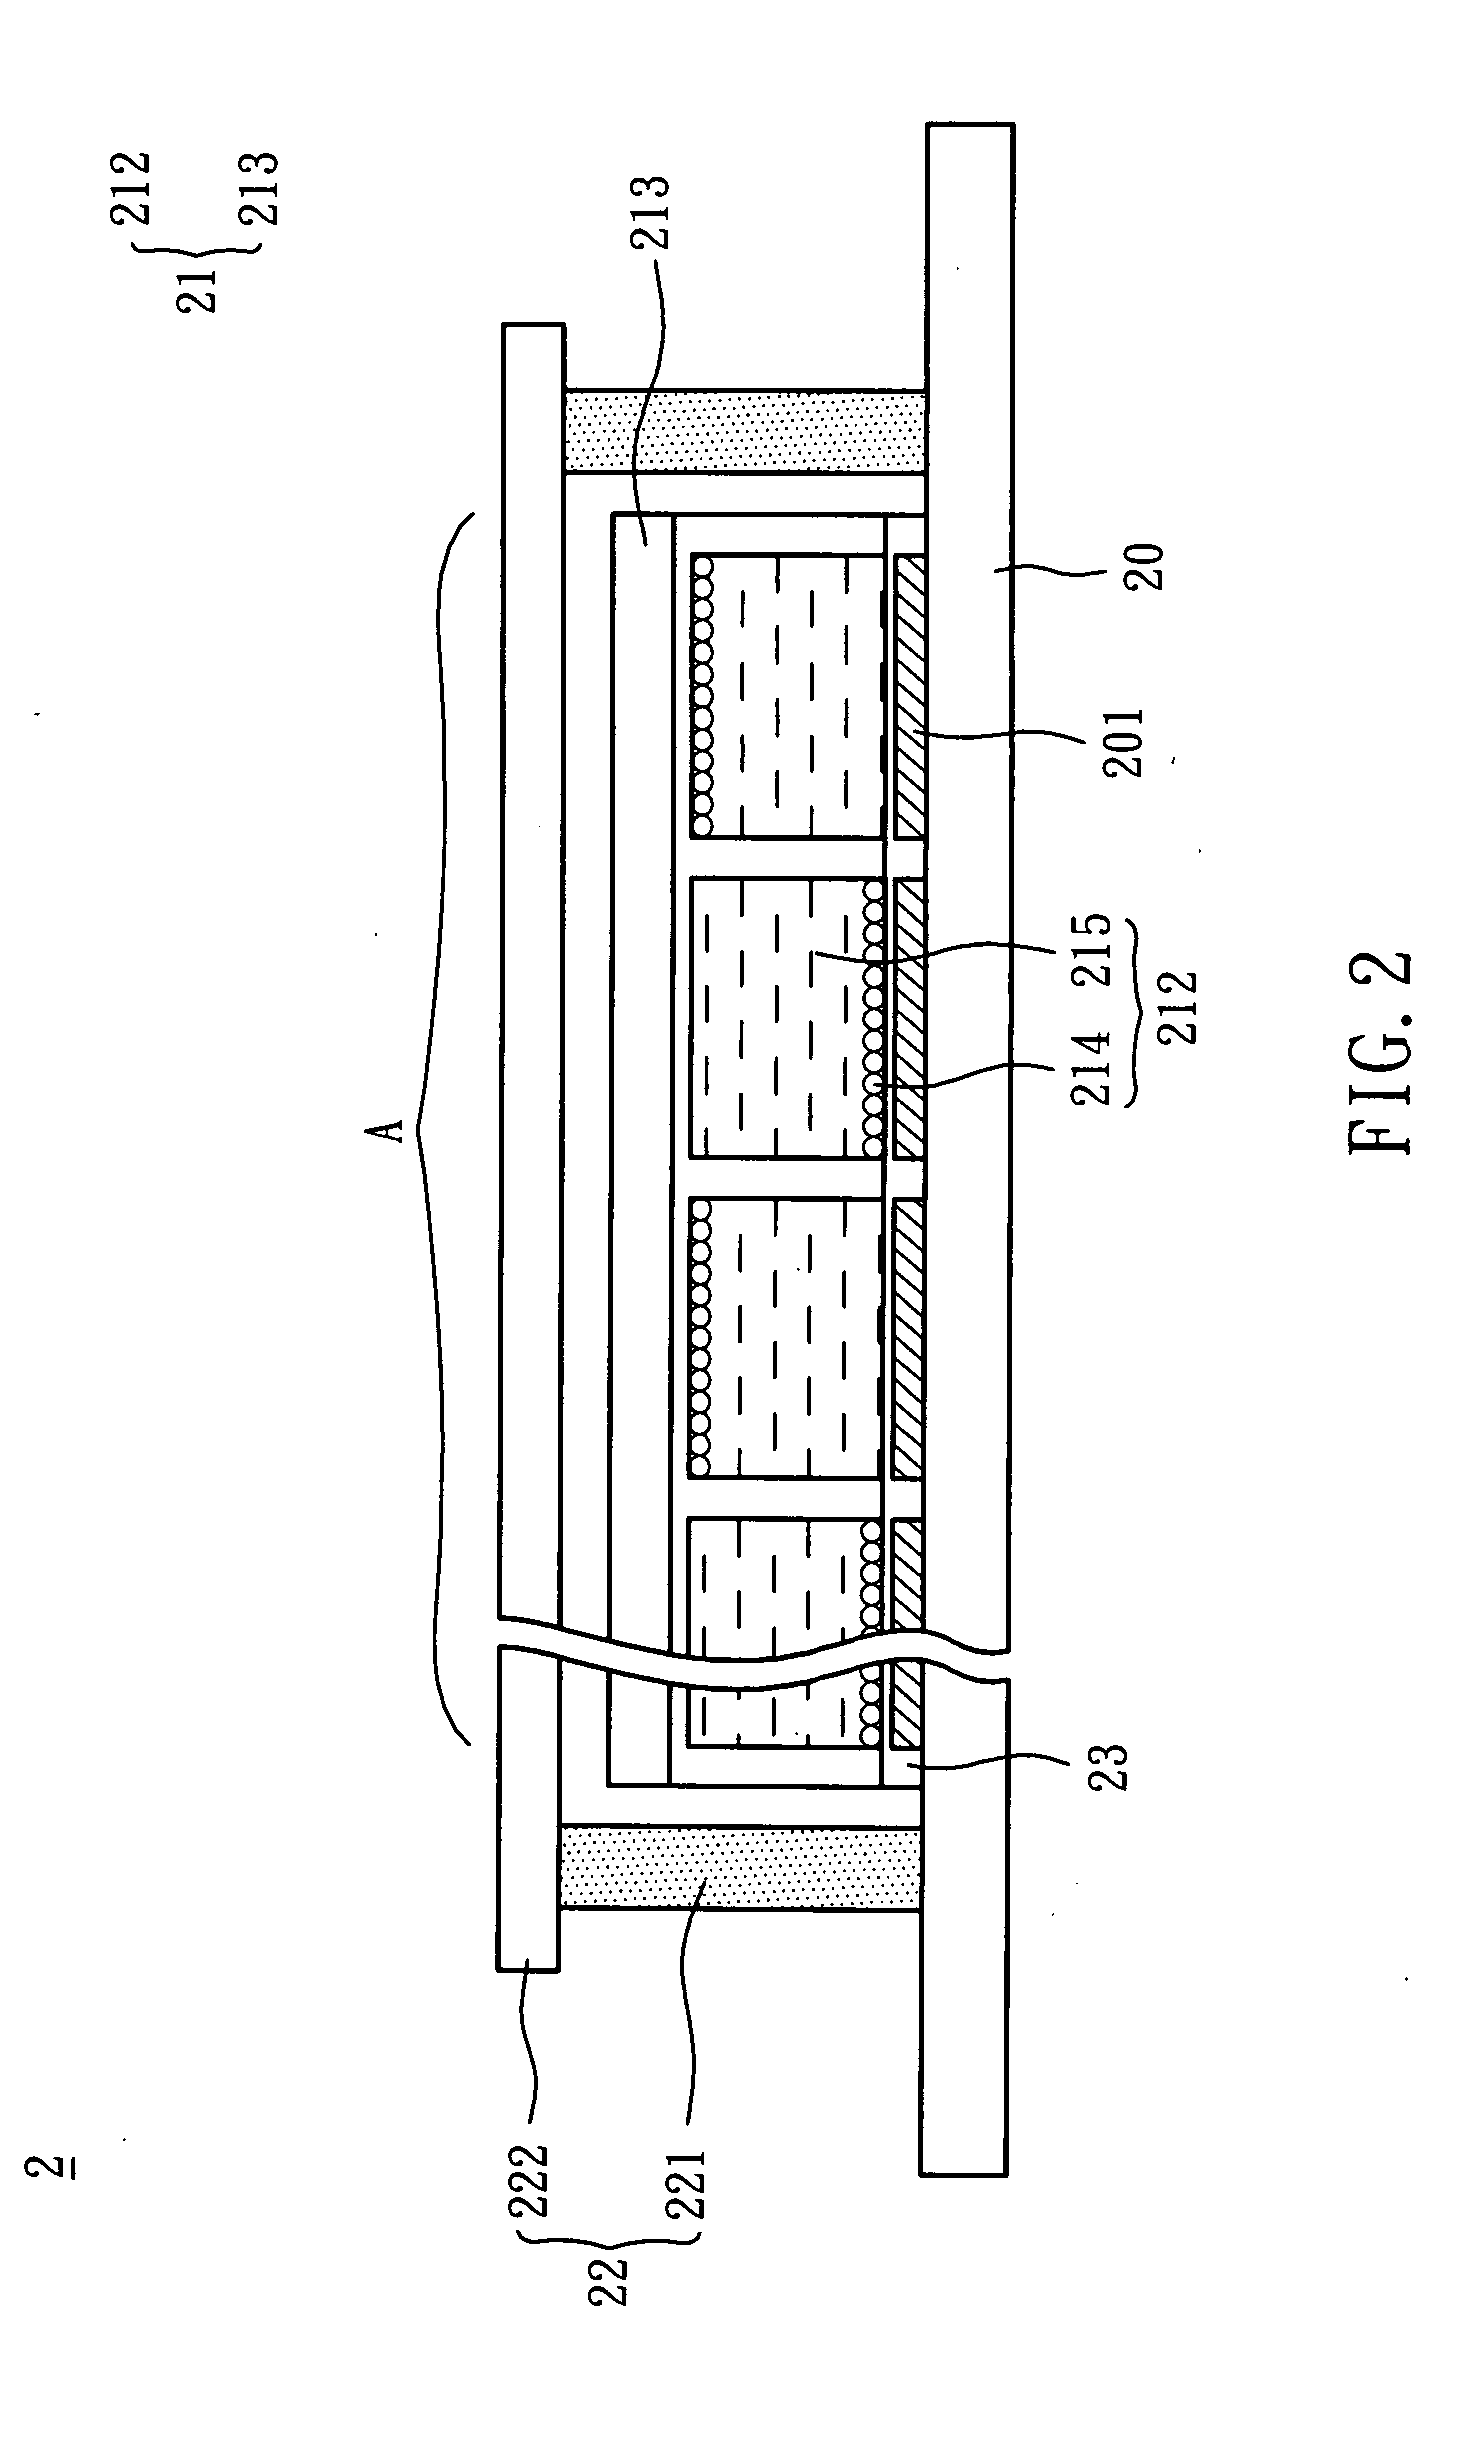 Electronic paper apparatus